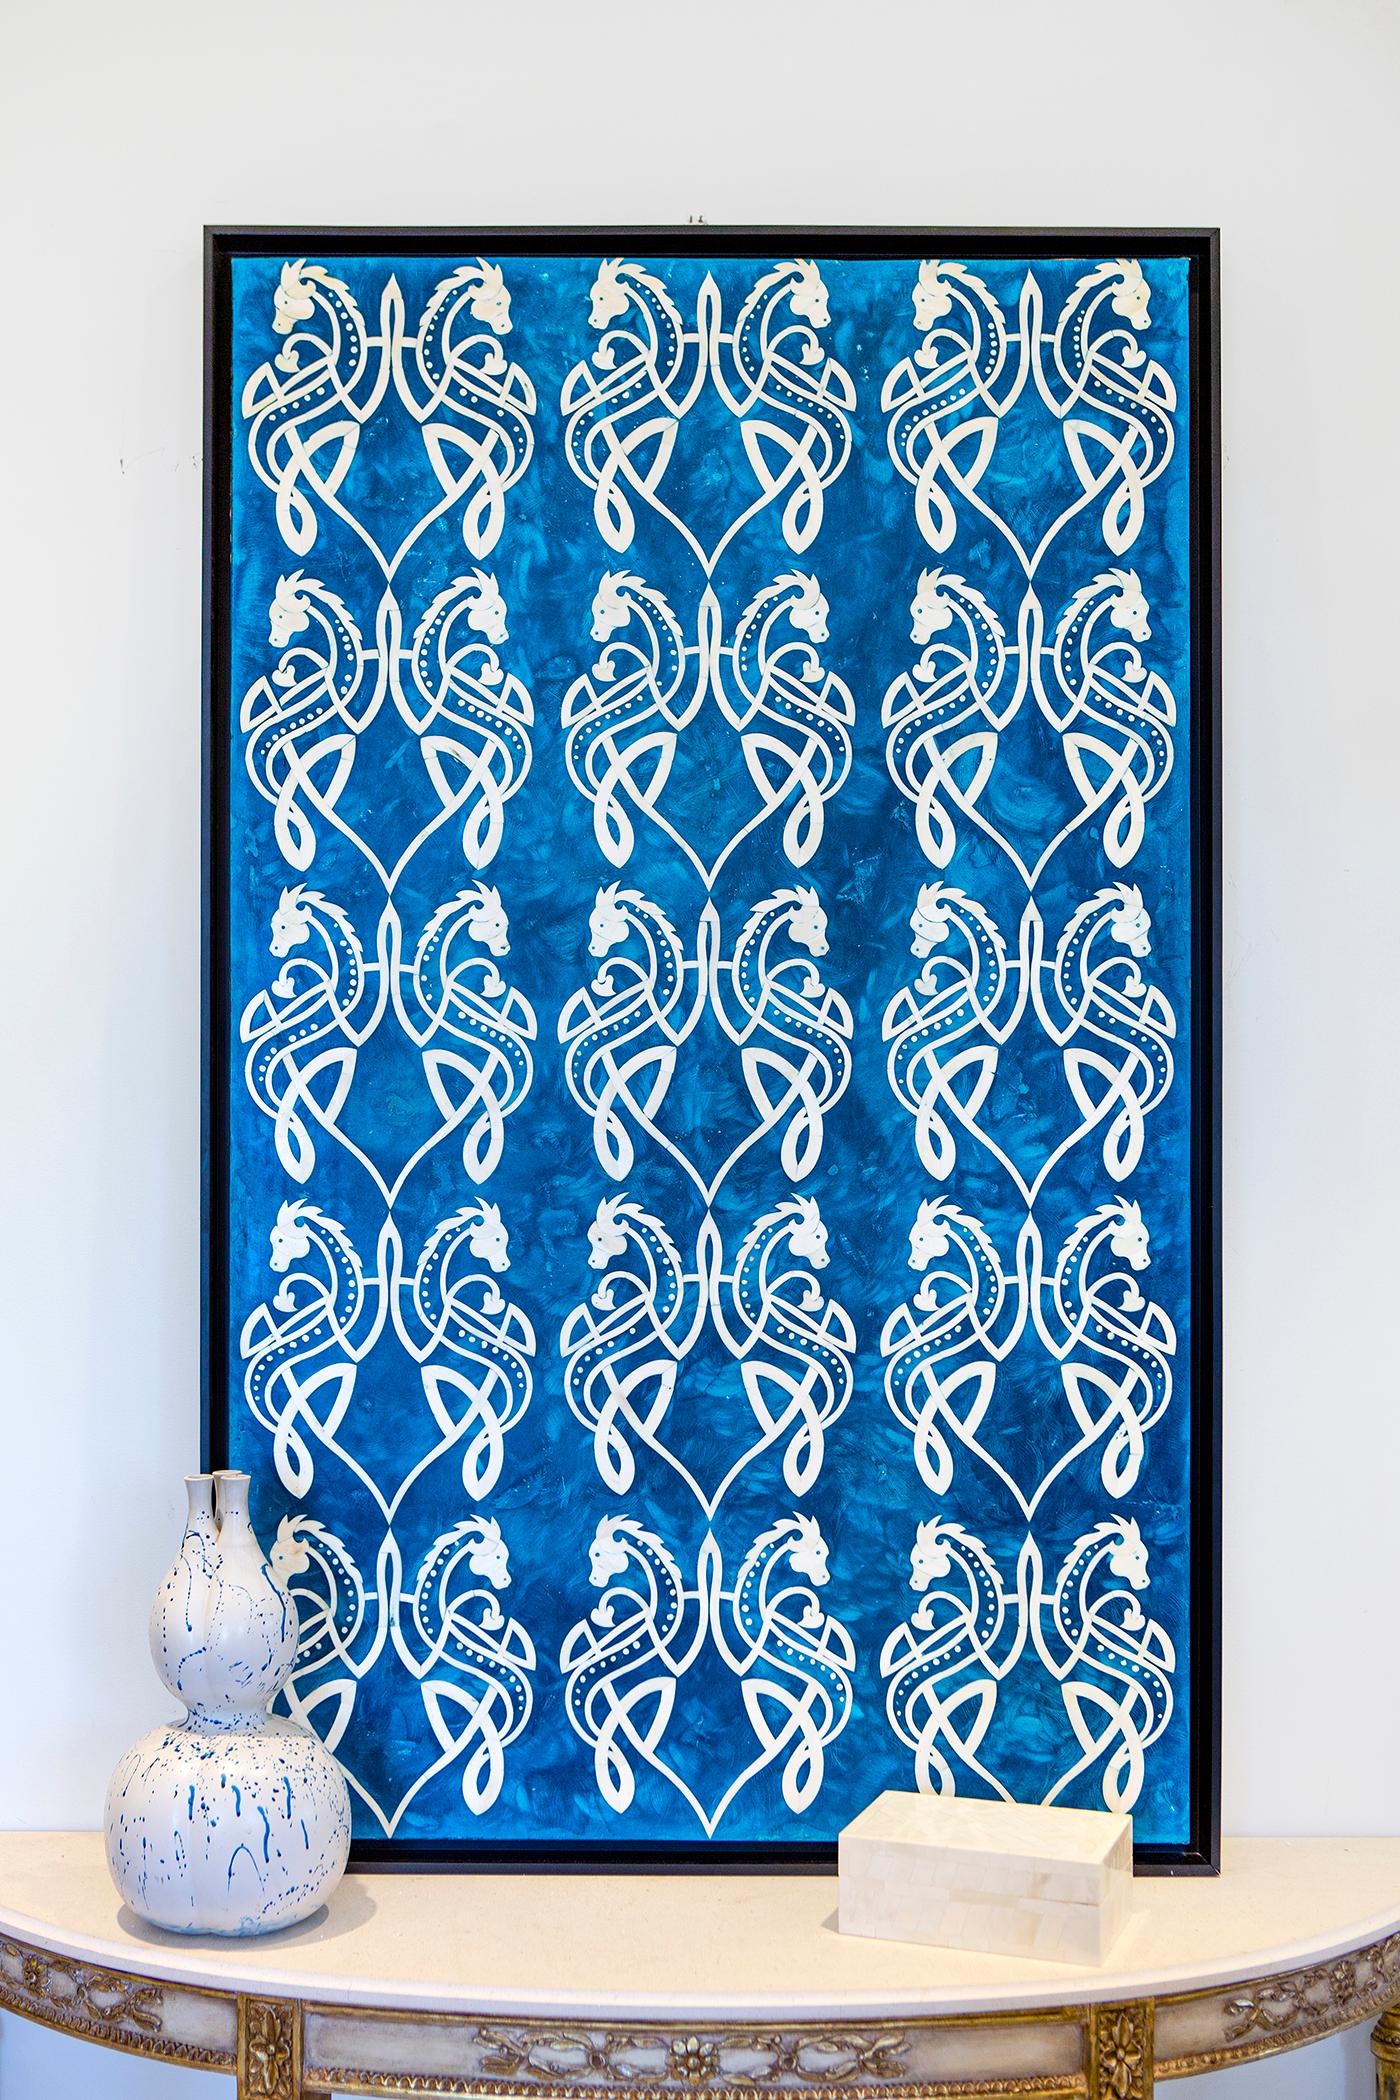 Feast your eyes on our Bone Inlaid Pattern Wall Art in Blue Resin. This isn't just art; it's a mesmerizing blend of tradition and contemporary design.
Imagine multiple Celtic dragons, a symbol of power and mysticism, coming to life right on your